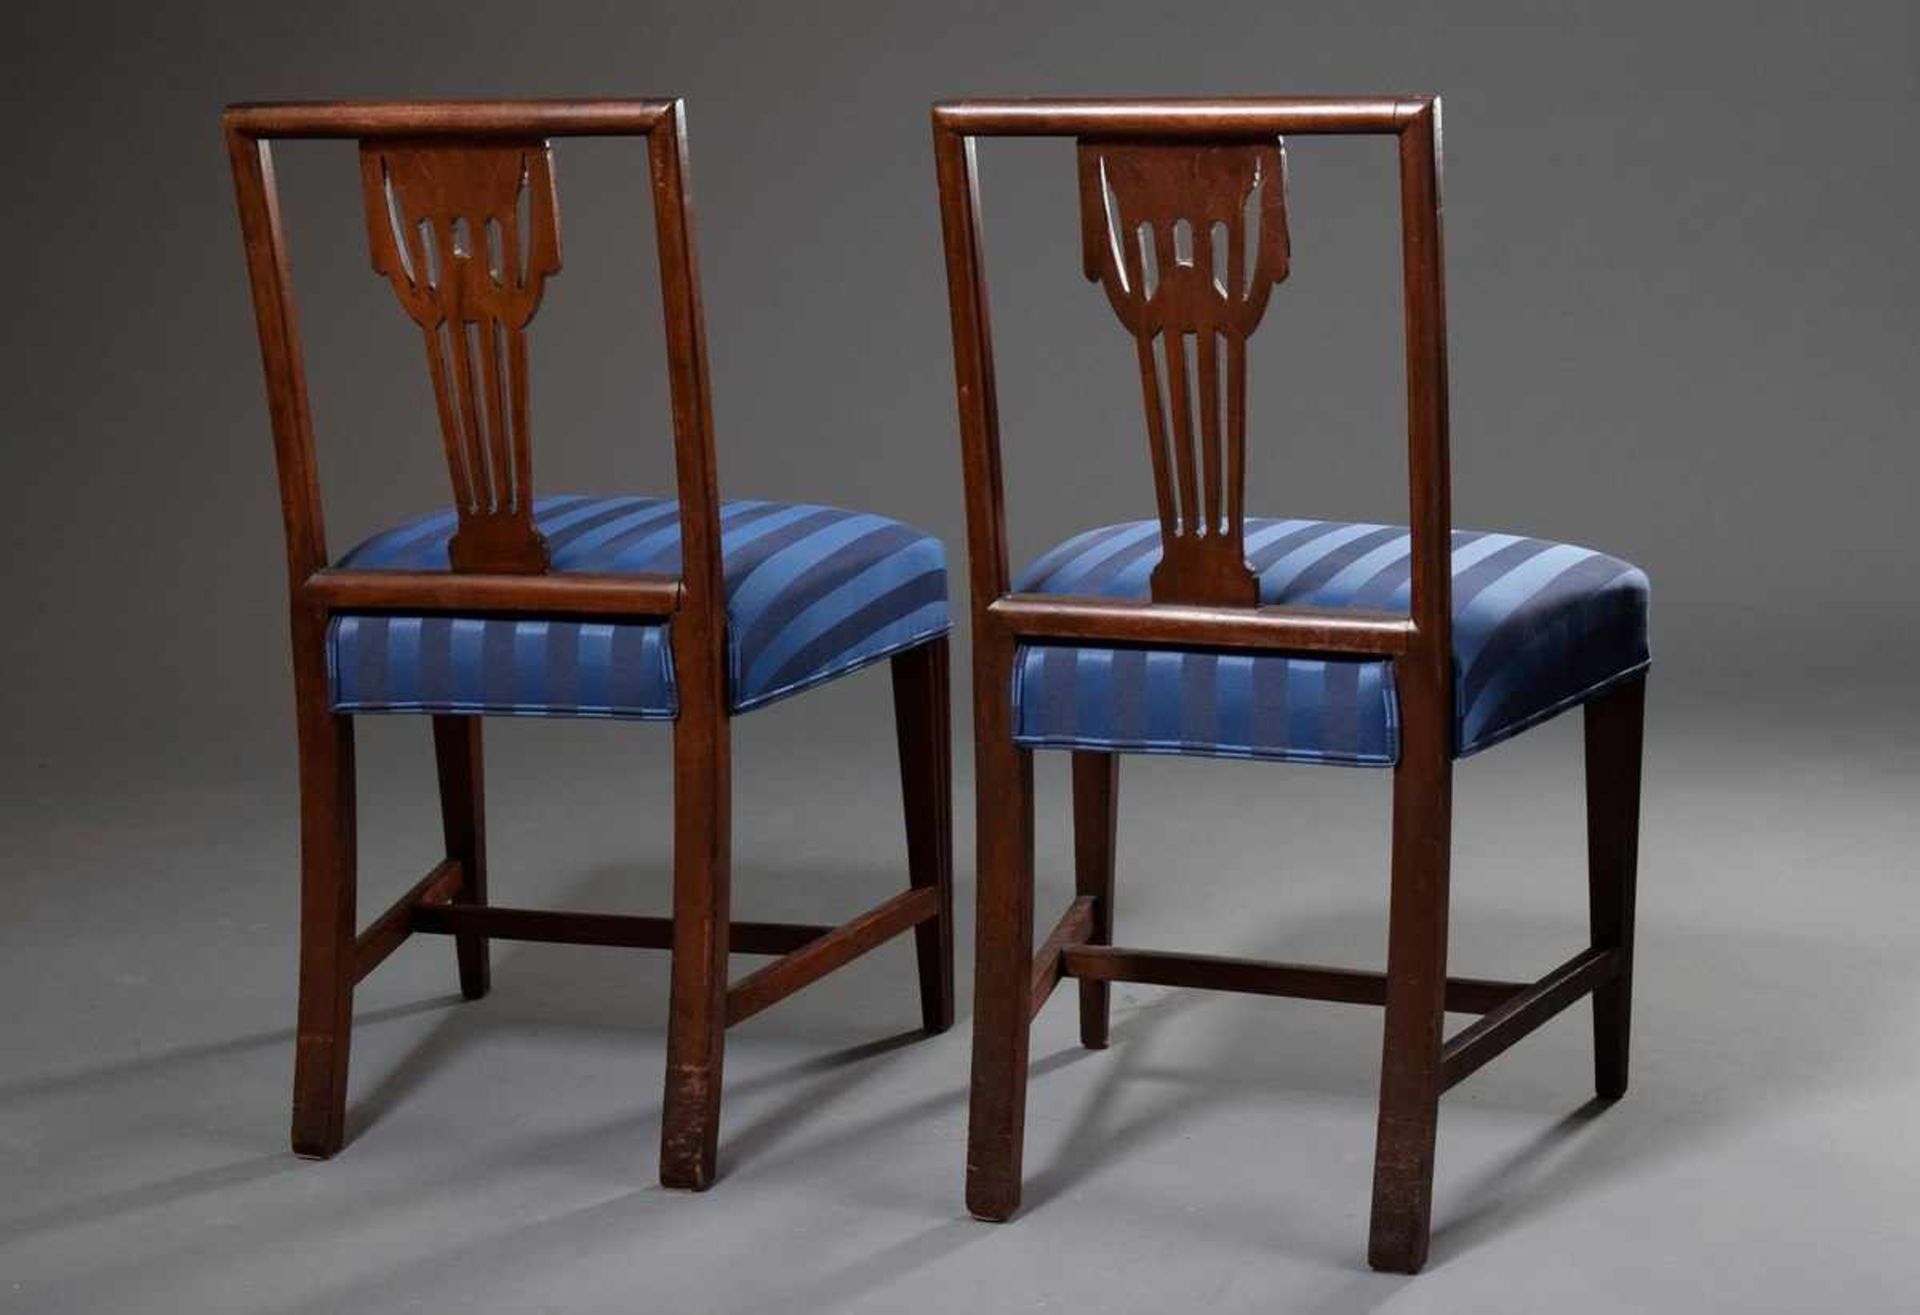 Pair of classicist chairs with "vase motif" in the backrest and blue cover, mahogany, h. 47/90cmPaar - Bild 2 aus 4